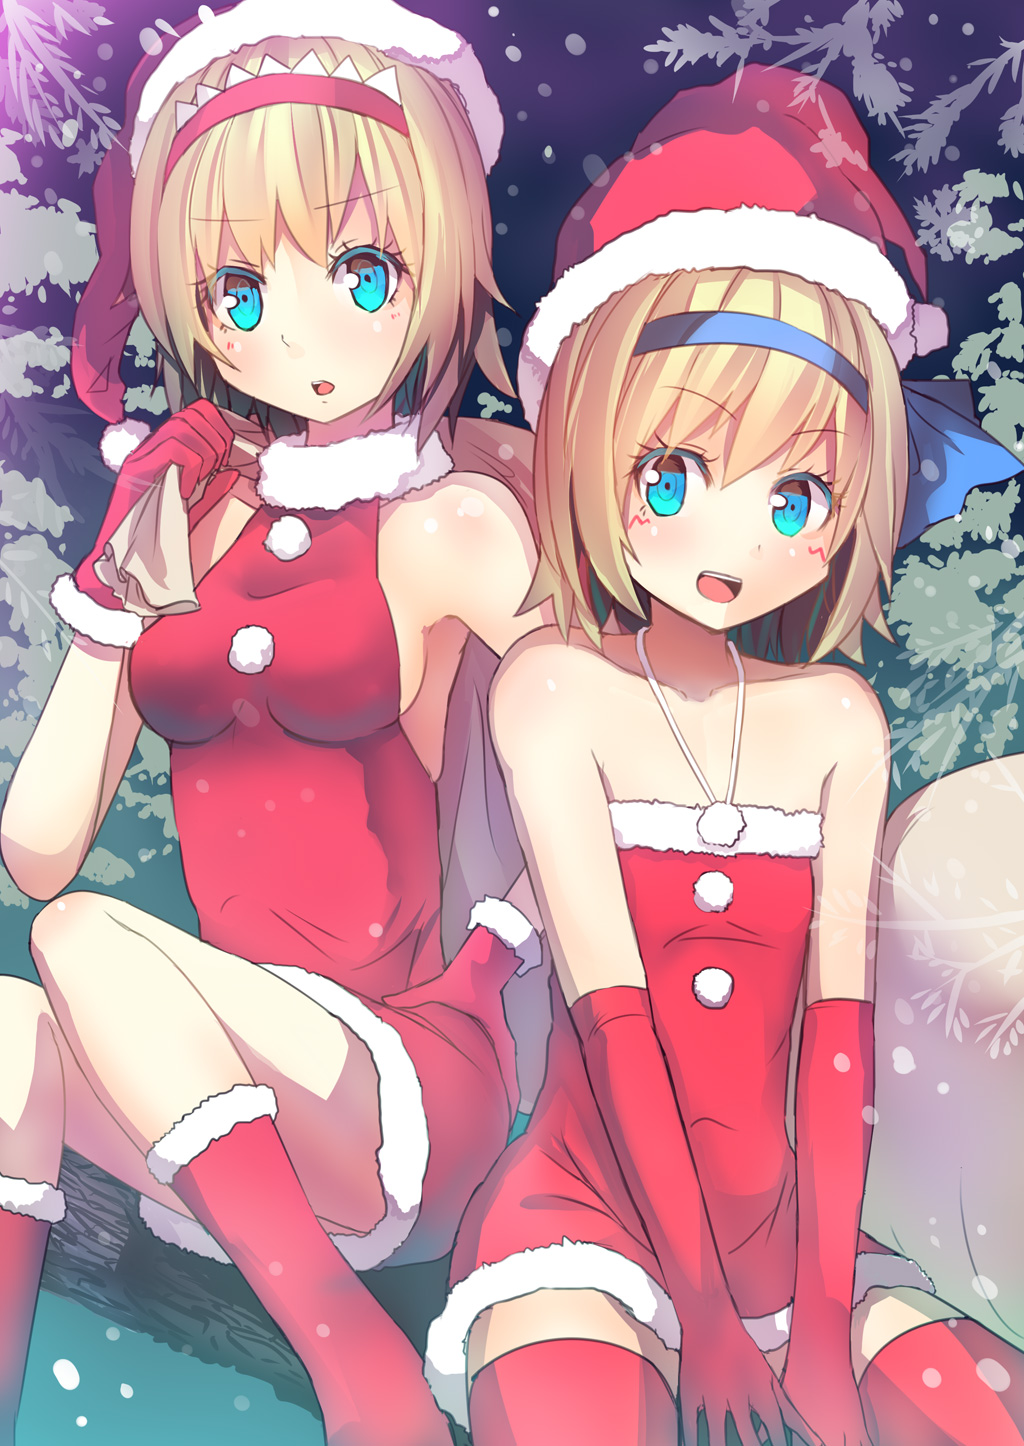 2girls alice_margatroid alice_margatroid_(pc-98) bare_shoulders blonde_hair blue_eyes culter dress dual_persona elbow_gloves gloves hair_ribbon hairband hat highres in_tree looking_at_viewer multiple_girls open_mouth red_boots red_gloves red_legwear ribbon santa_costume santa_hat sitting sitting_in_tree sleeveless sleeveless_dress smile strapless_dress thighhighs touhou touhou_(pc-98) tree v_arms zettai_ryouiki